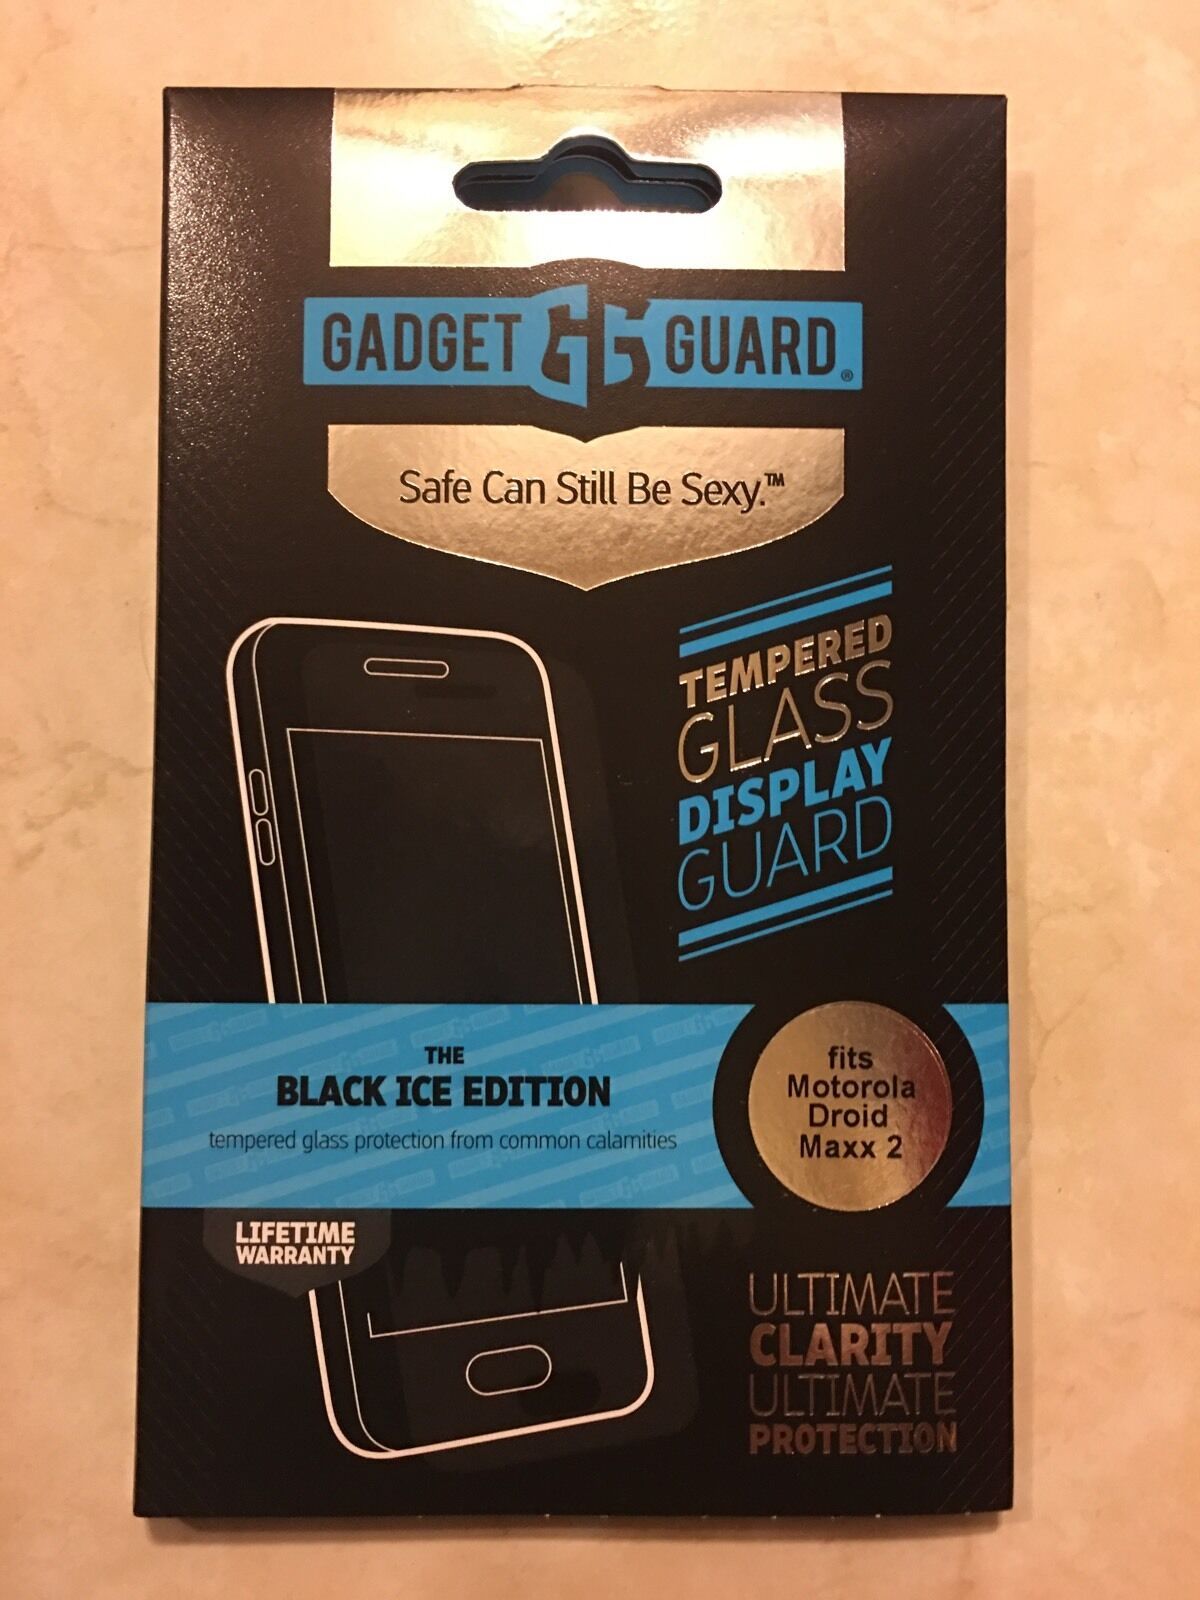 Primary image for Gadget Guard Motorola DROID MAXX 2 Tempered Glass Black Ice Screen Protector